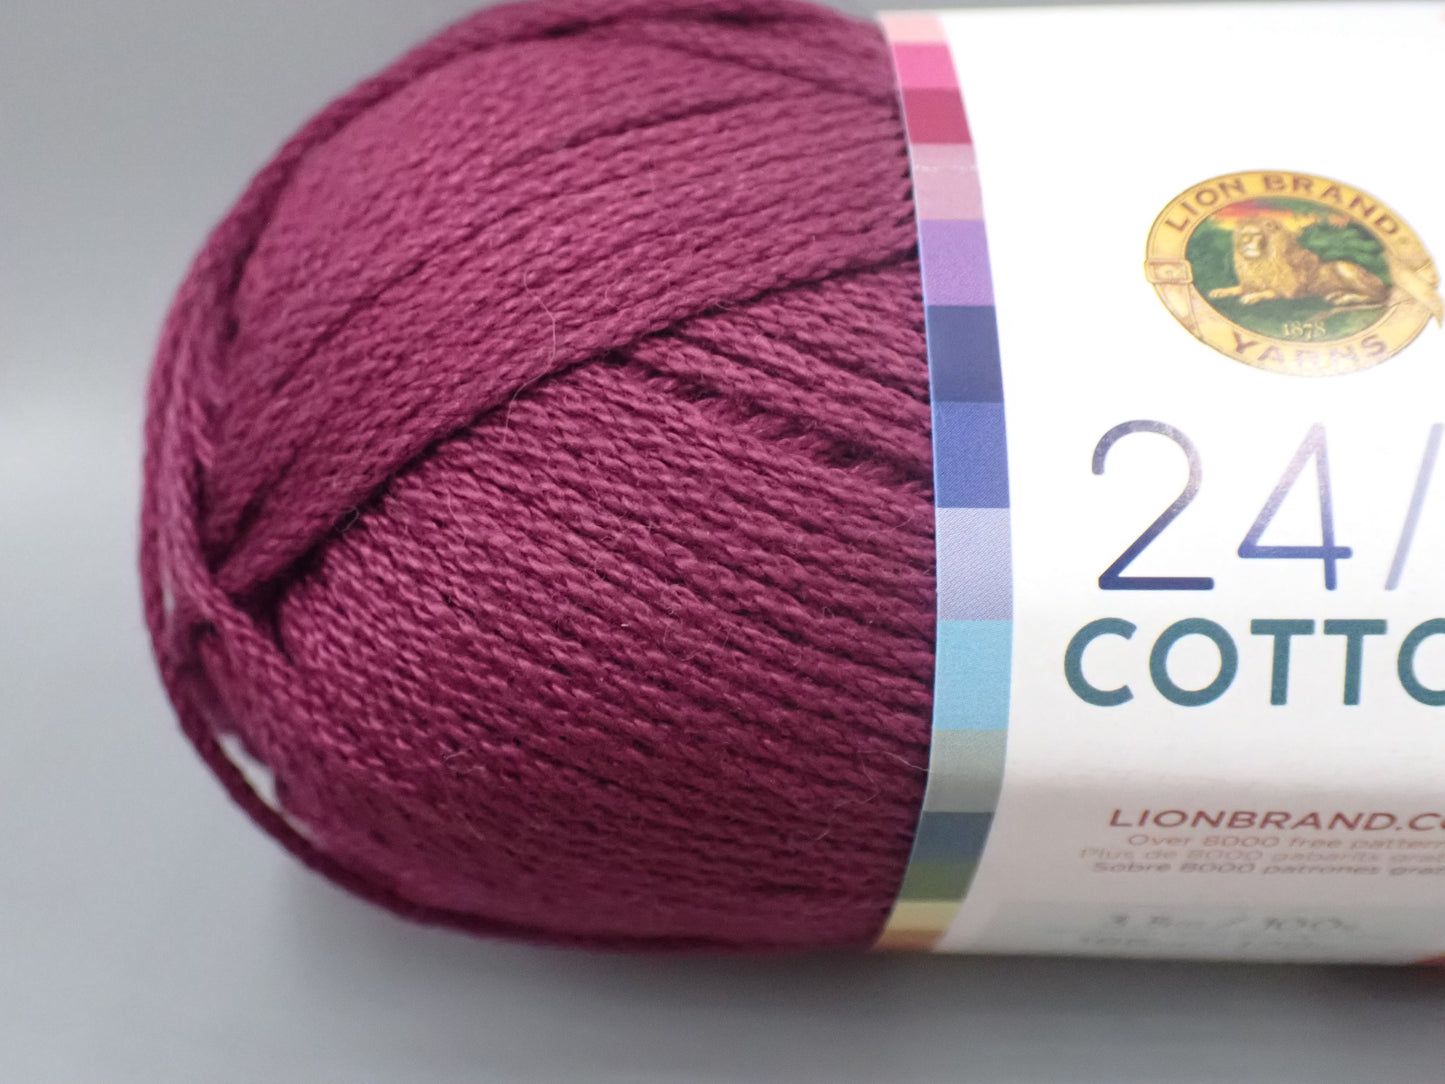 Lion Brand Yarns Worsted weight 24/7 Cotton Yarn Beets